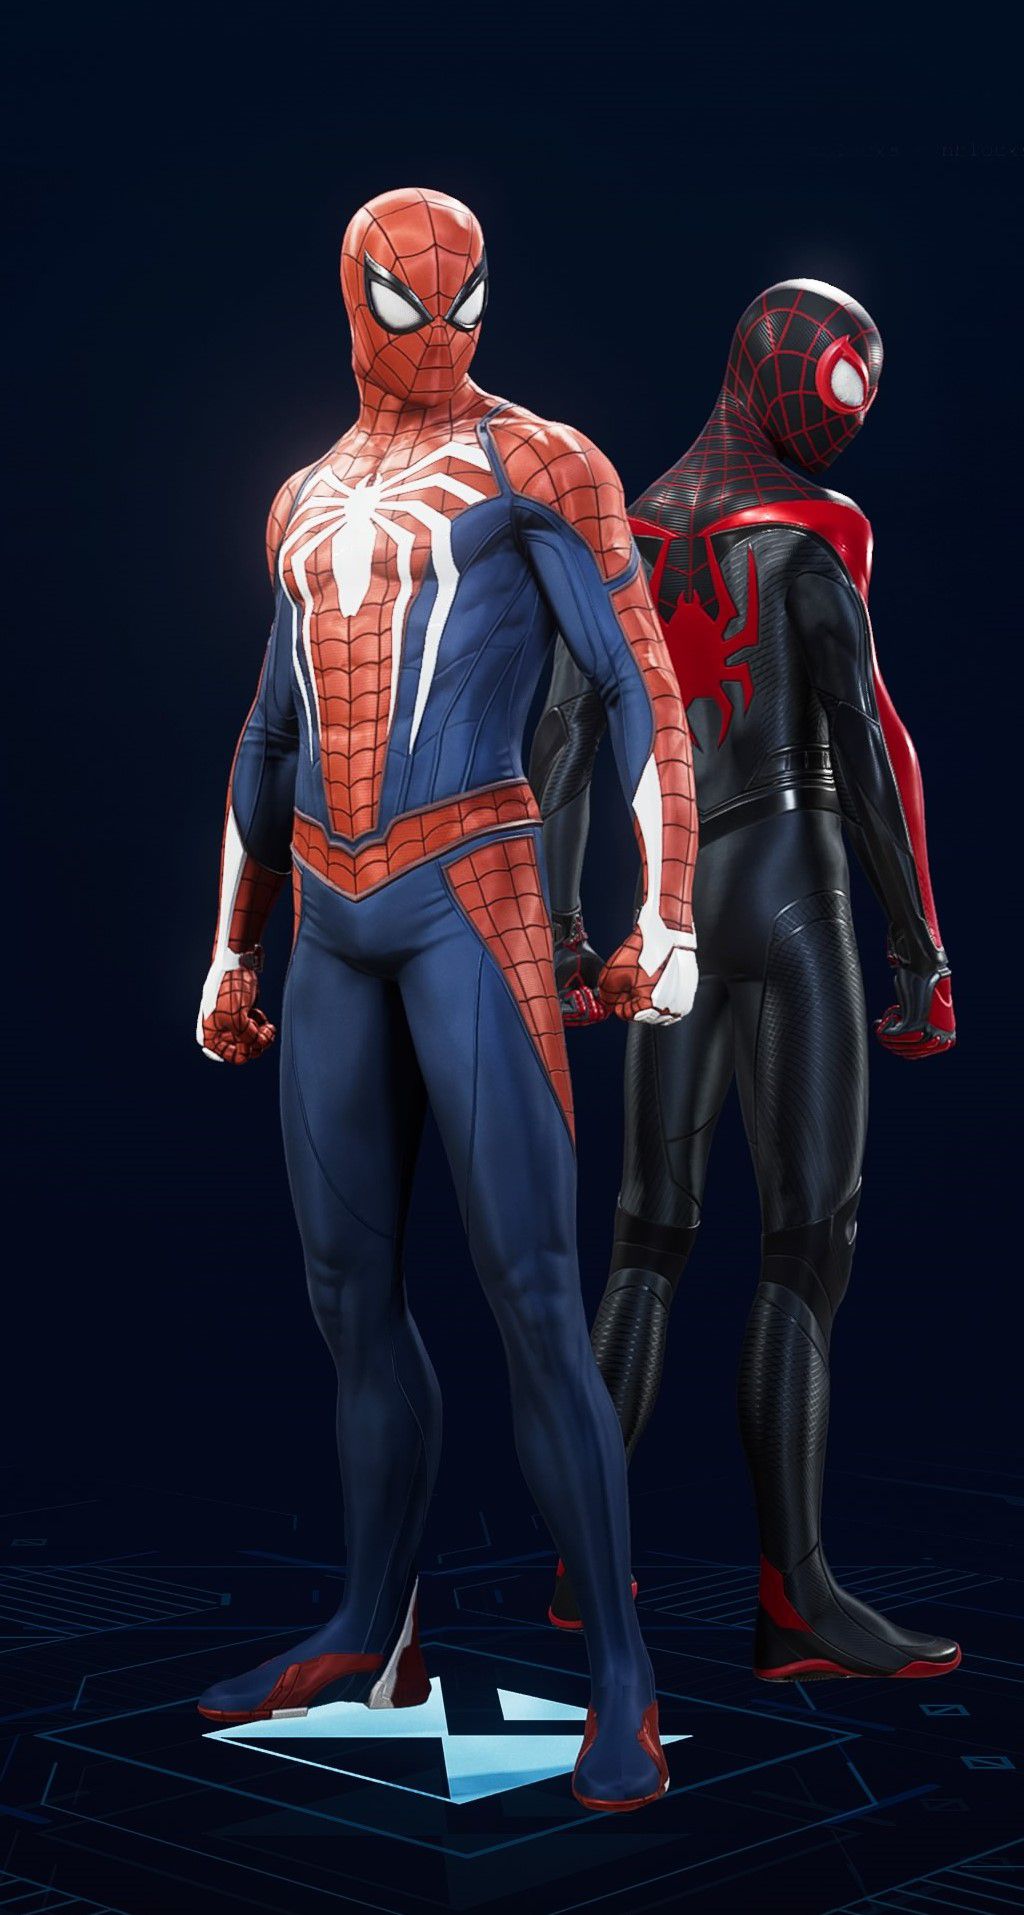 Peter Parker stands in his Advanced Suit in the suit selection screen of Spider-Man 2.